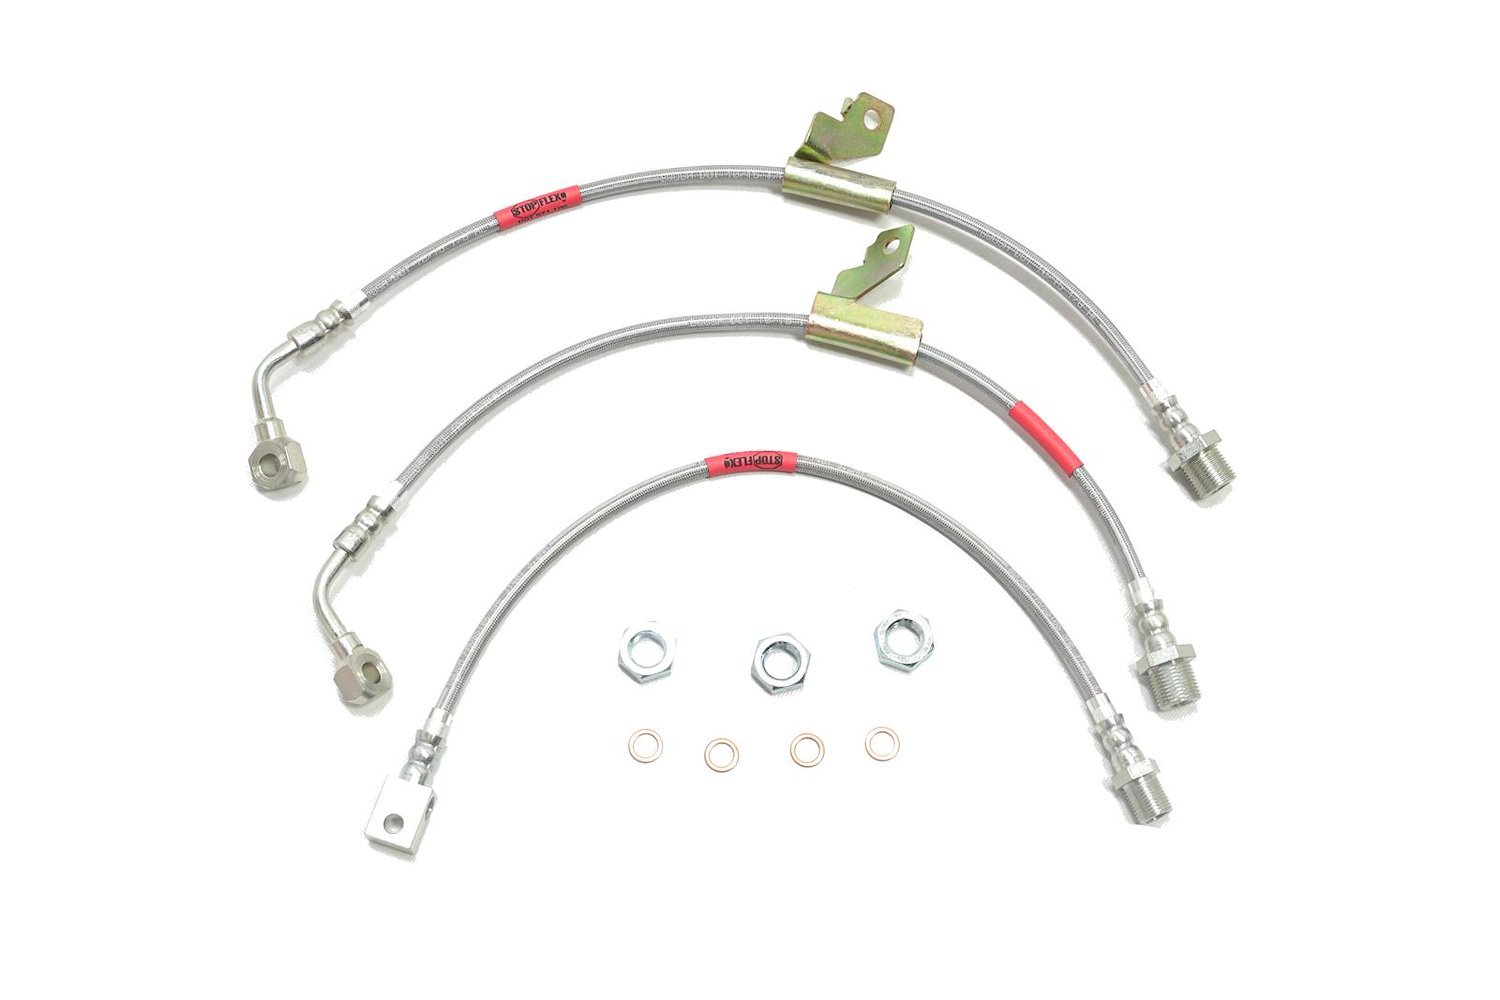 Chevy / GMC S series S10 StopFlex Brake Hose Kit 4WD Early 91 Front Disc/Rear Drum 3 Pc. -1982 1983